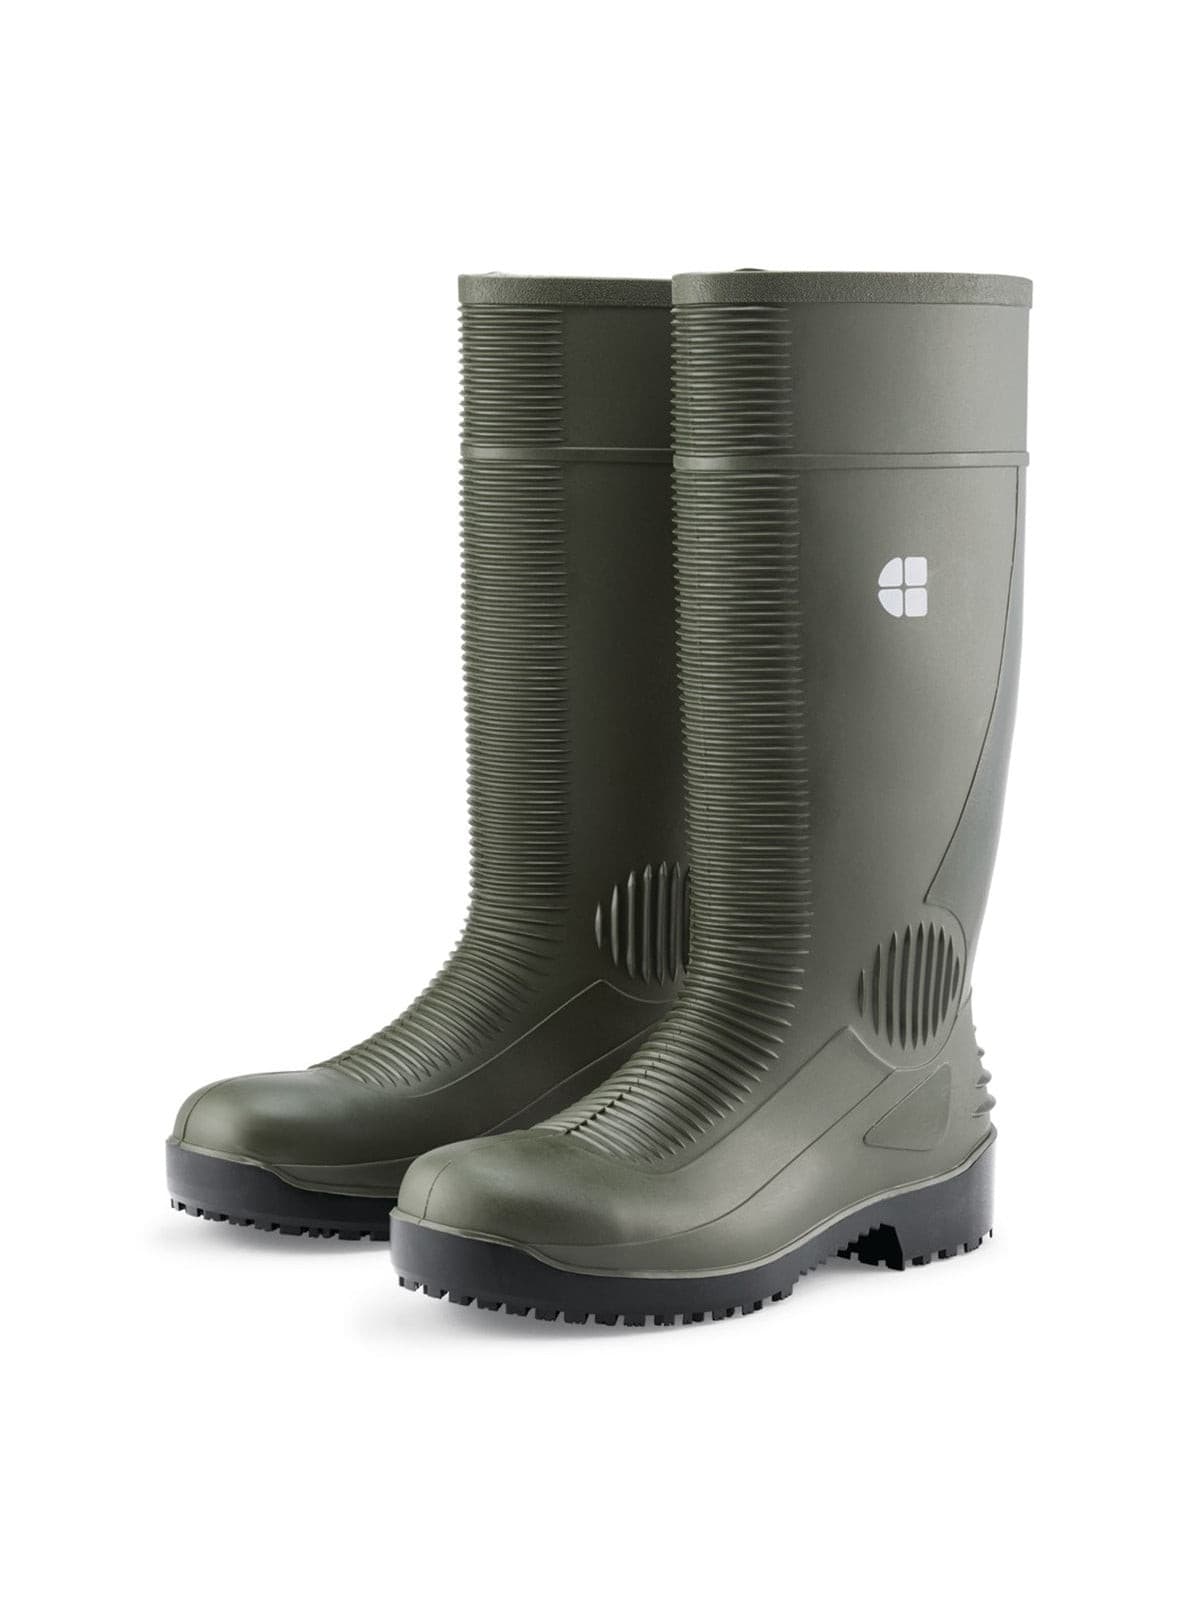 Unisex Safety Boot Bastion Green (S4) by Shoes For Crews -  ChefsCotton